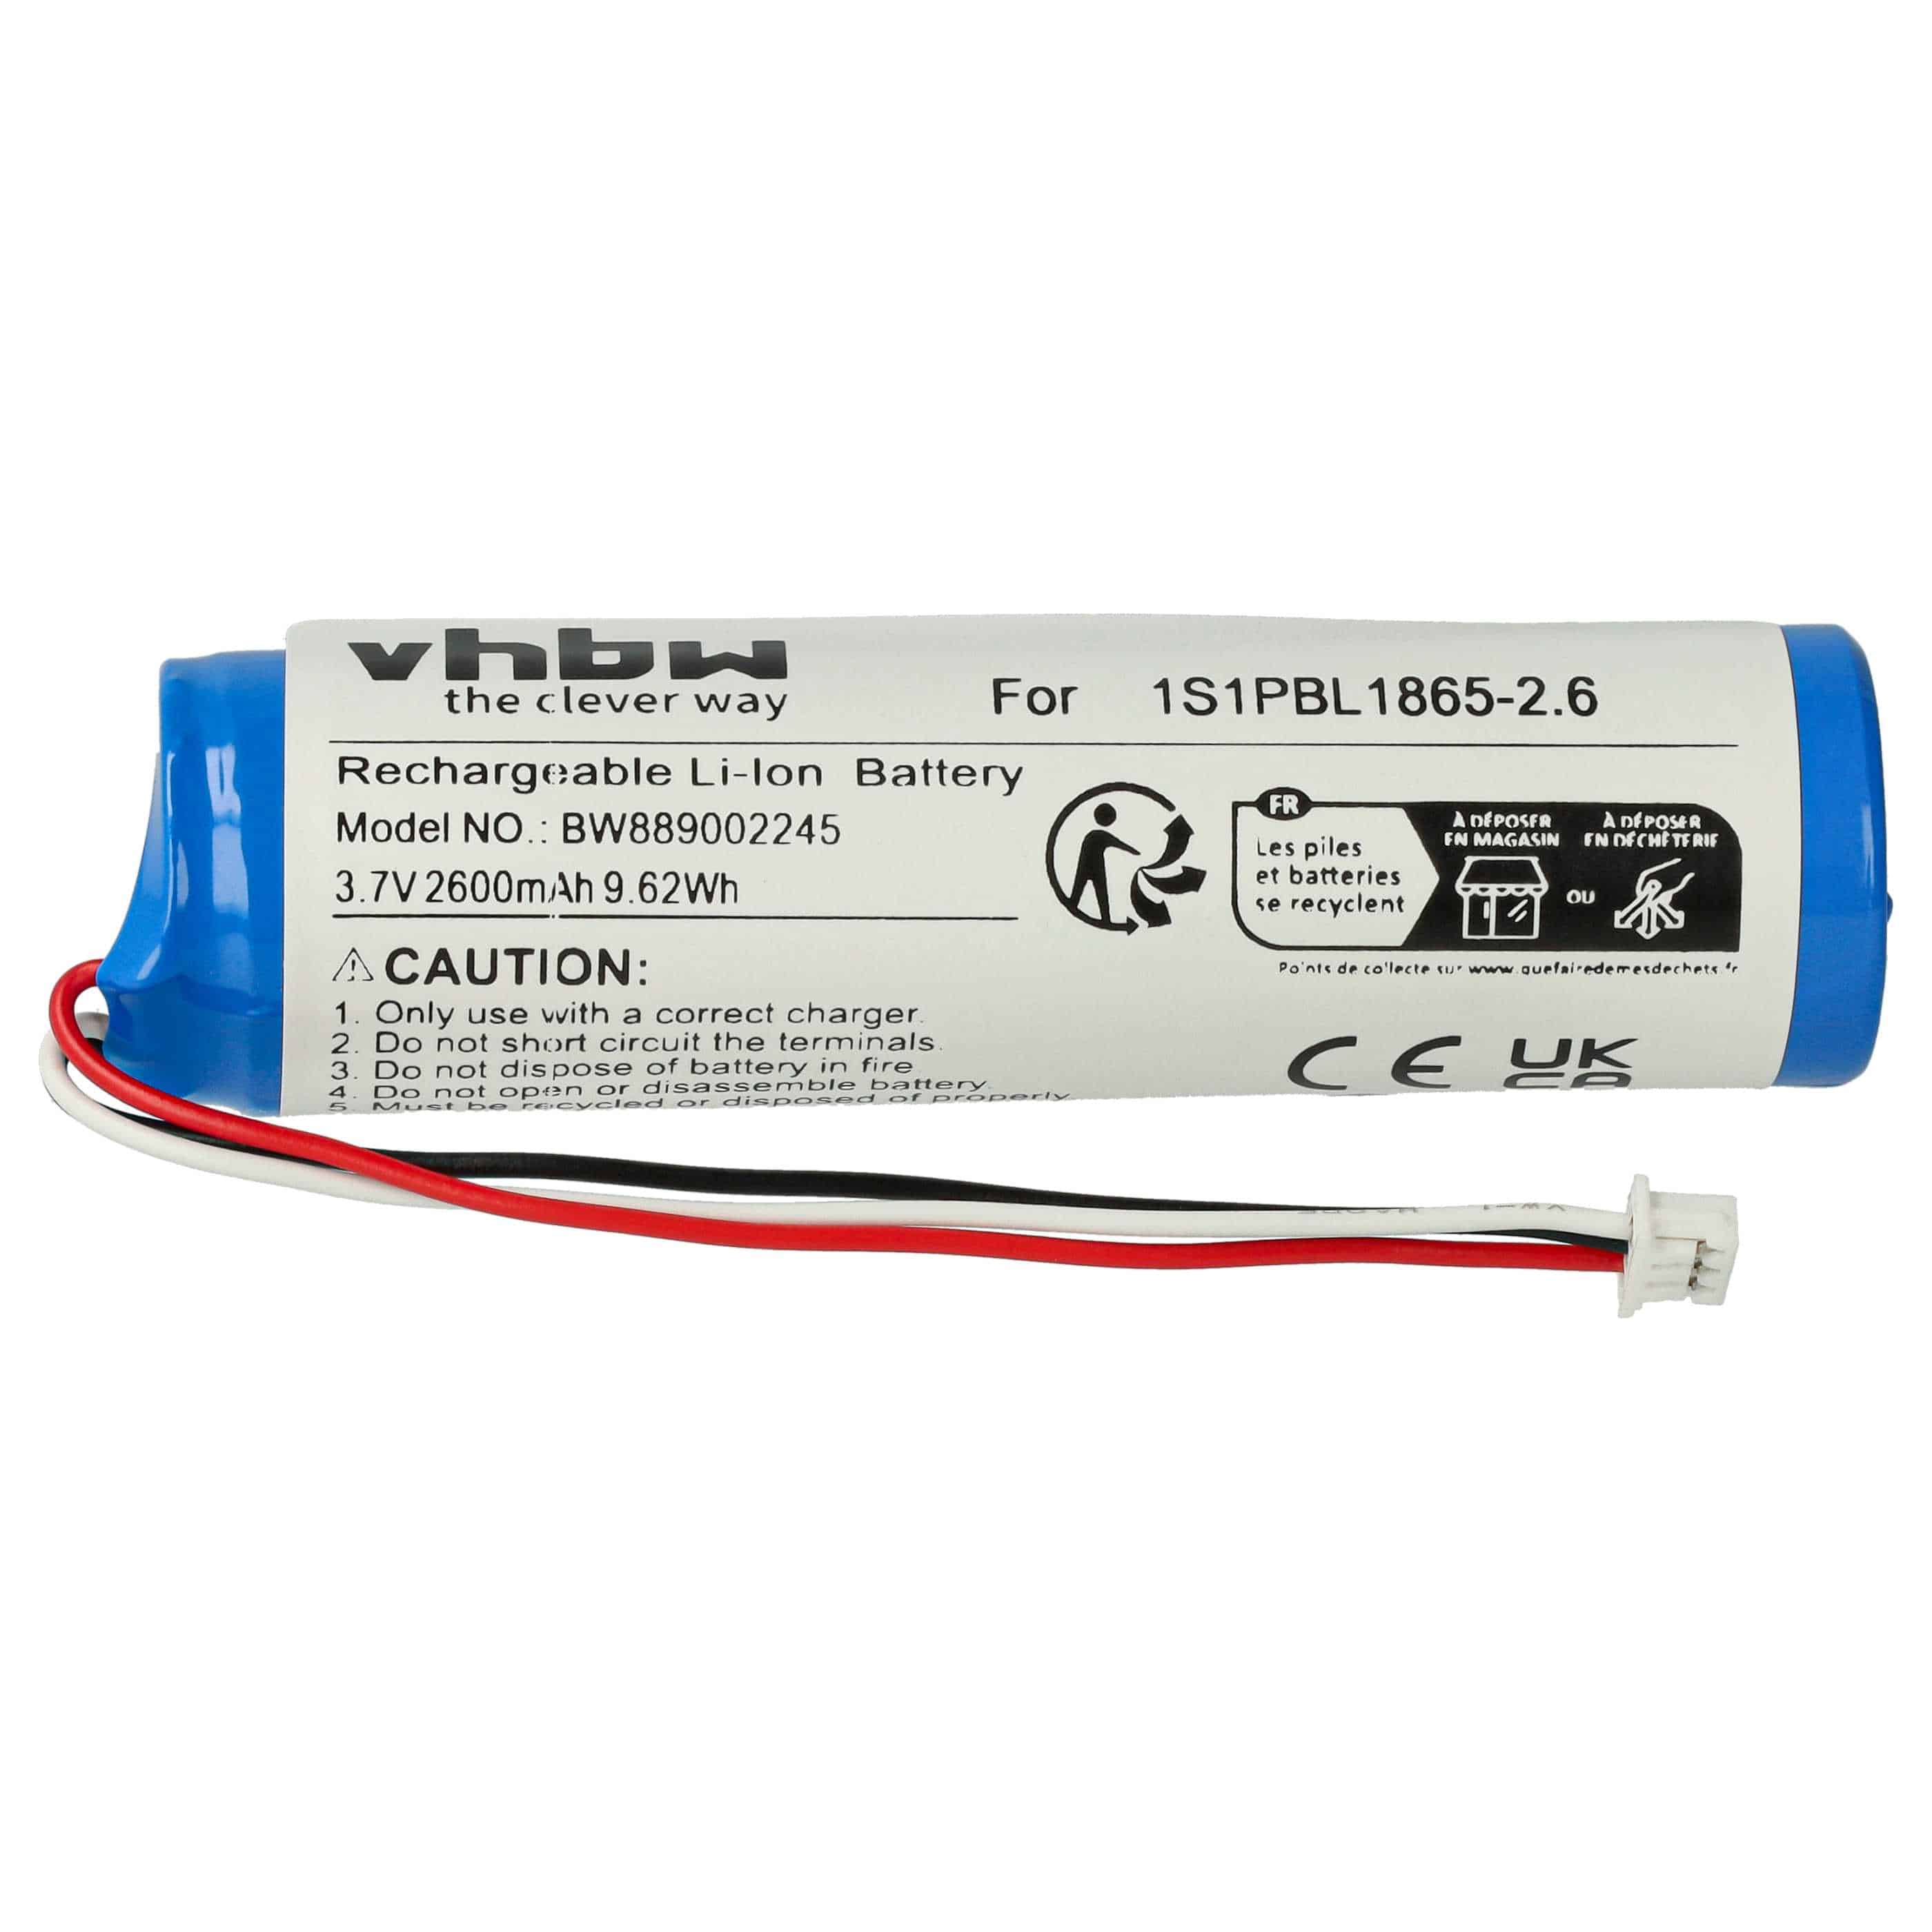 Baby Monitor Battery Replacement for Philips 1S1PBL1865-2.6 - 2600mAh 3.7V Li-Ion